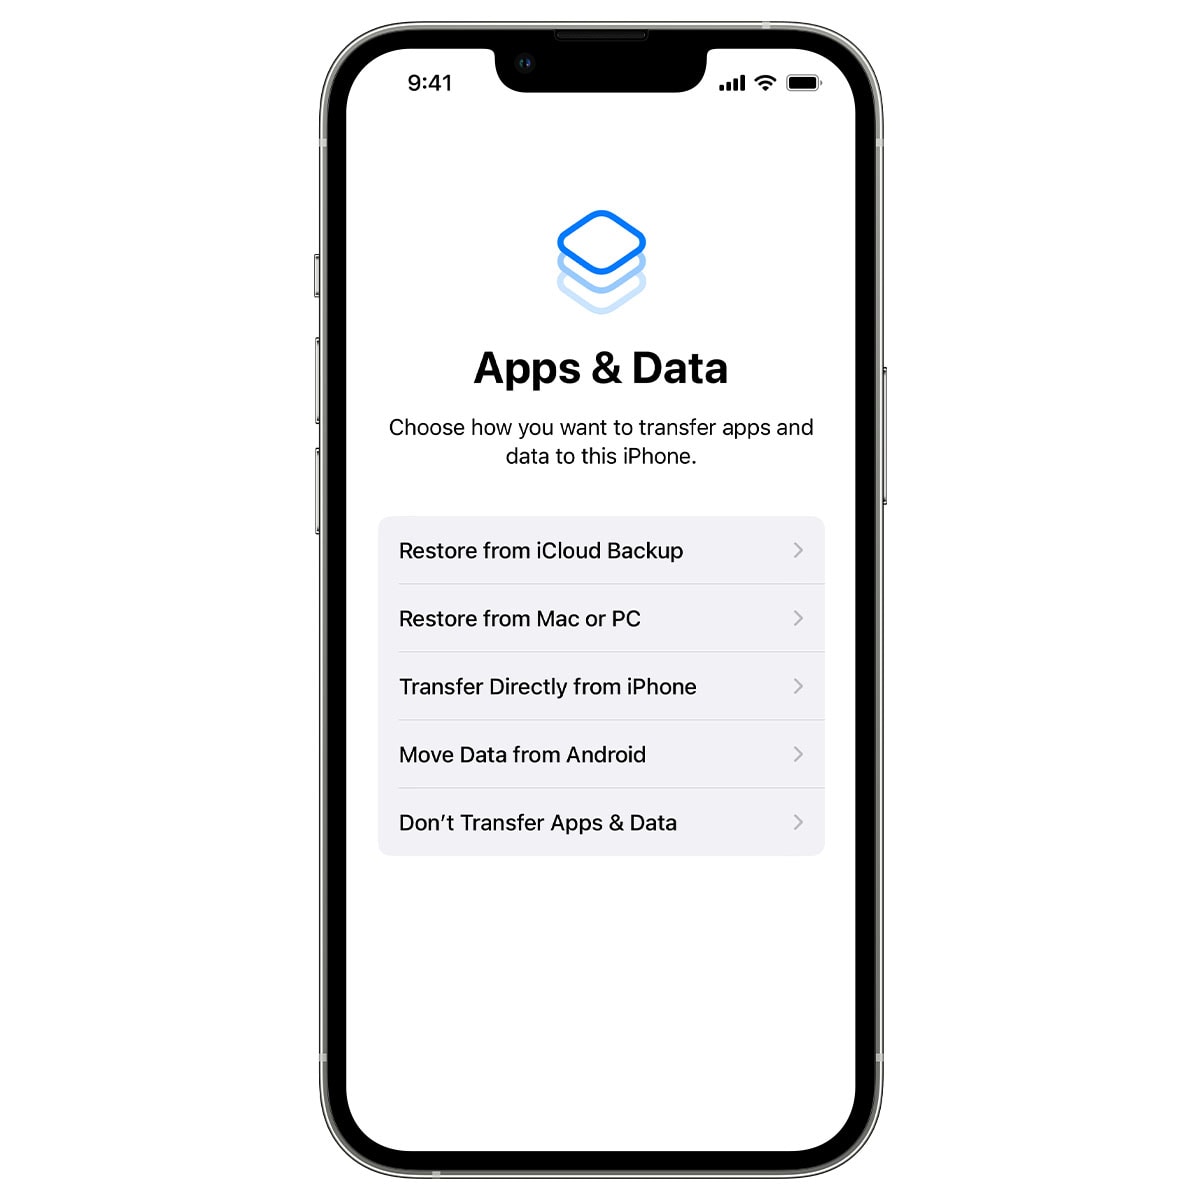 Menu that says "Choose how you want to transfer apps and data to this iPhone" with options "Restore from iCloud Backup," "Restore from Mac or PC," "Transfer directly from iPhone," "Move Data from Android" and "Don't Transfer Apps & Data"